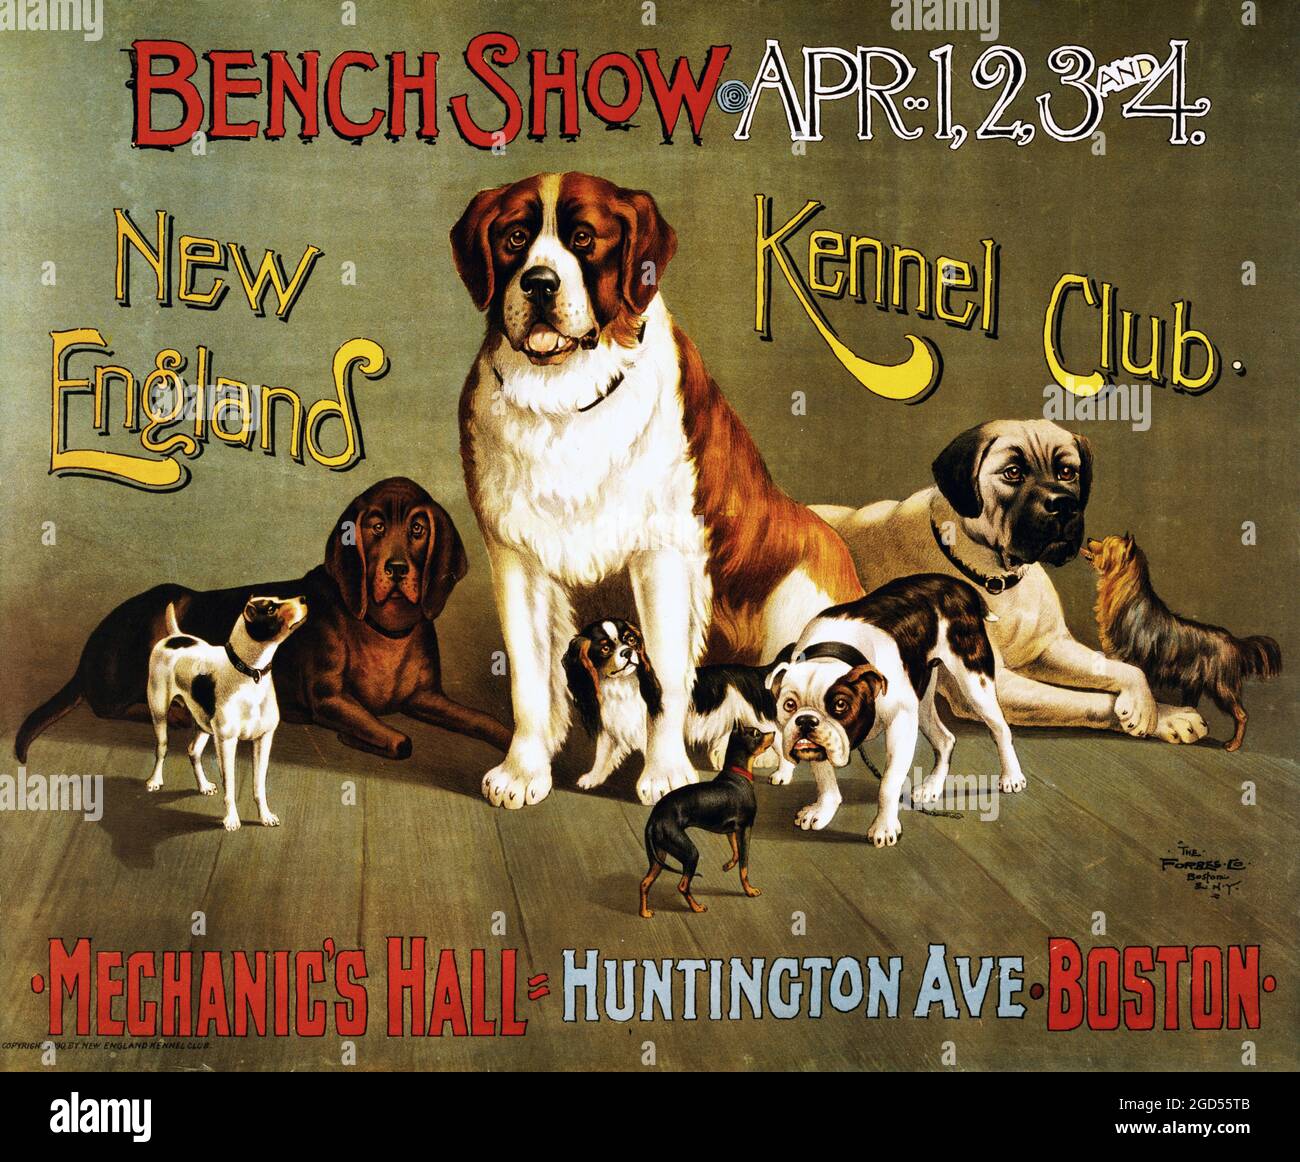 New England Kennel Club bench show, promotional poster, ca. 1890 Stock Photo